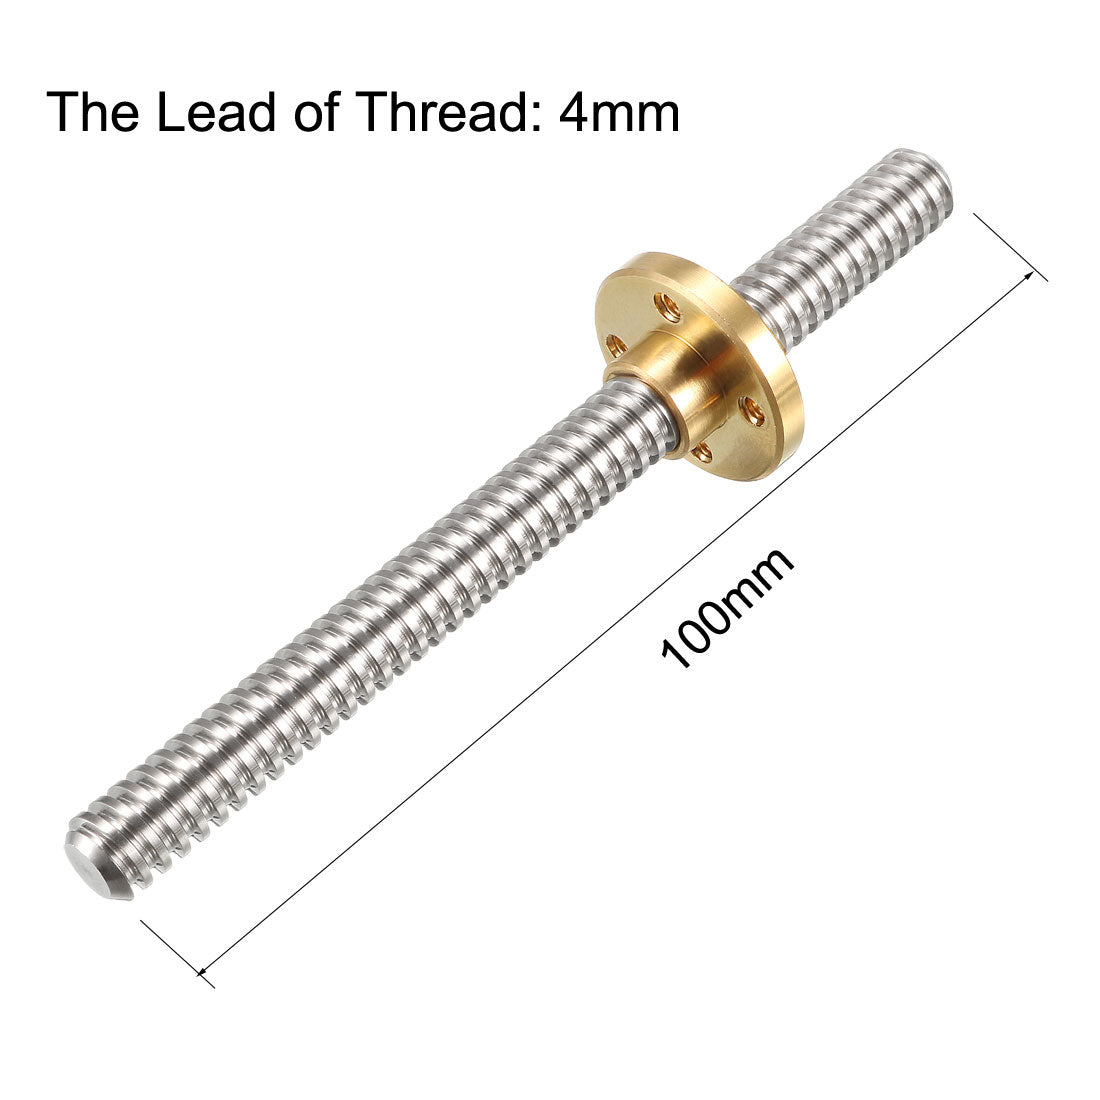 uxcell Uxcell 100mm T8 Pitch 2mm Lead 4mm Lead Screw Rod with Copper Nut for 3D Printer